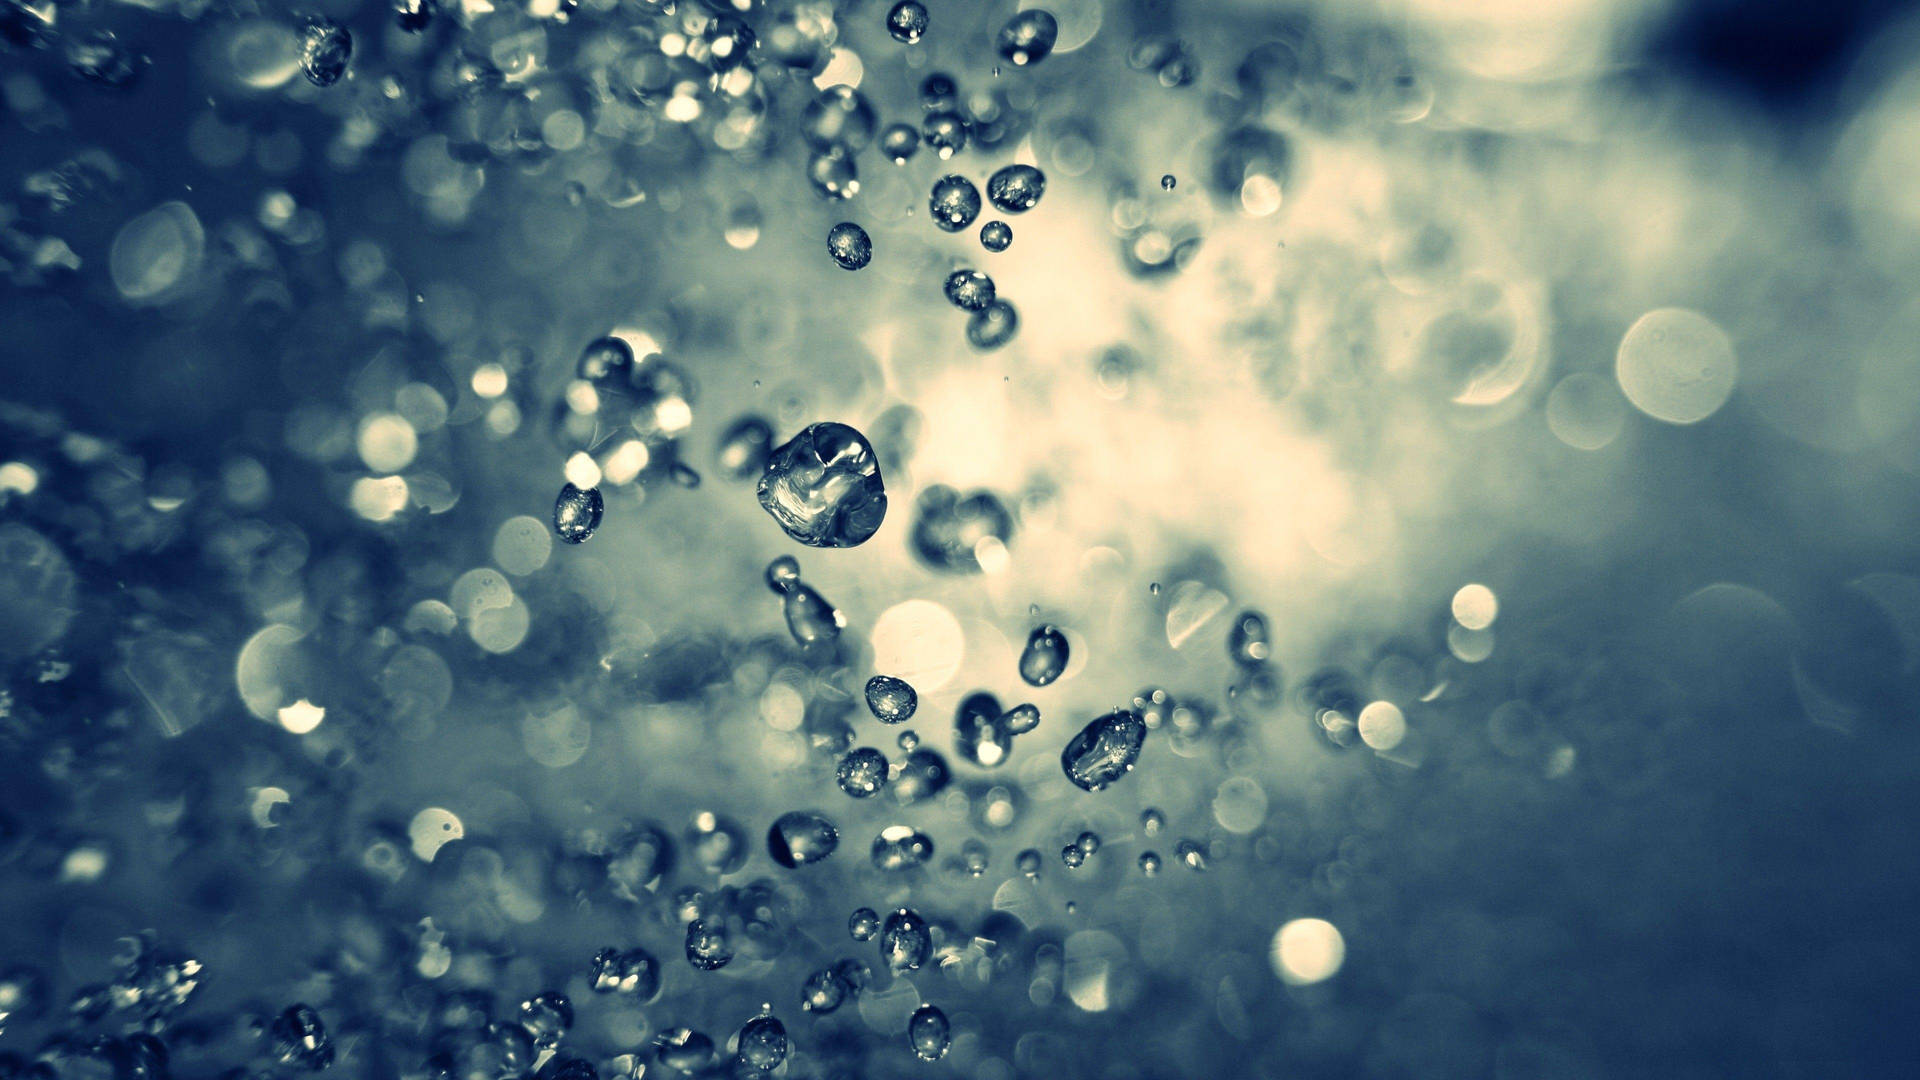 Free Water Wallpaper Downloads, [900+] Water Wallpapers for FREE |  